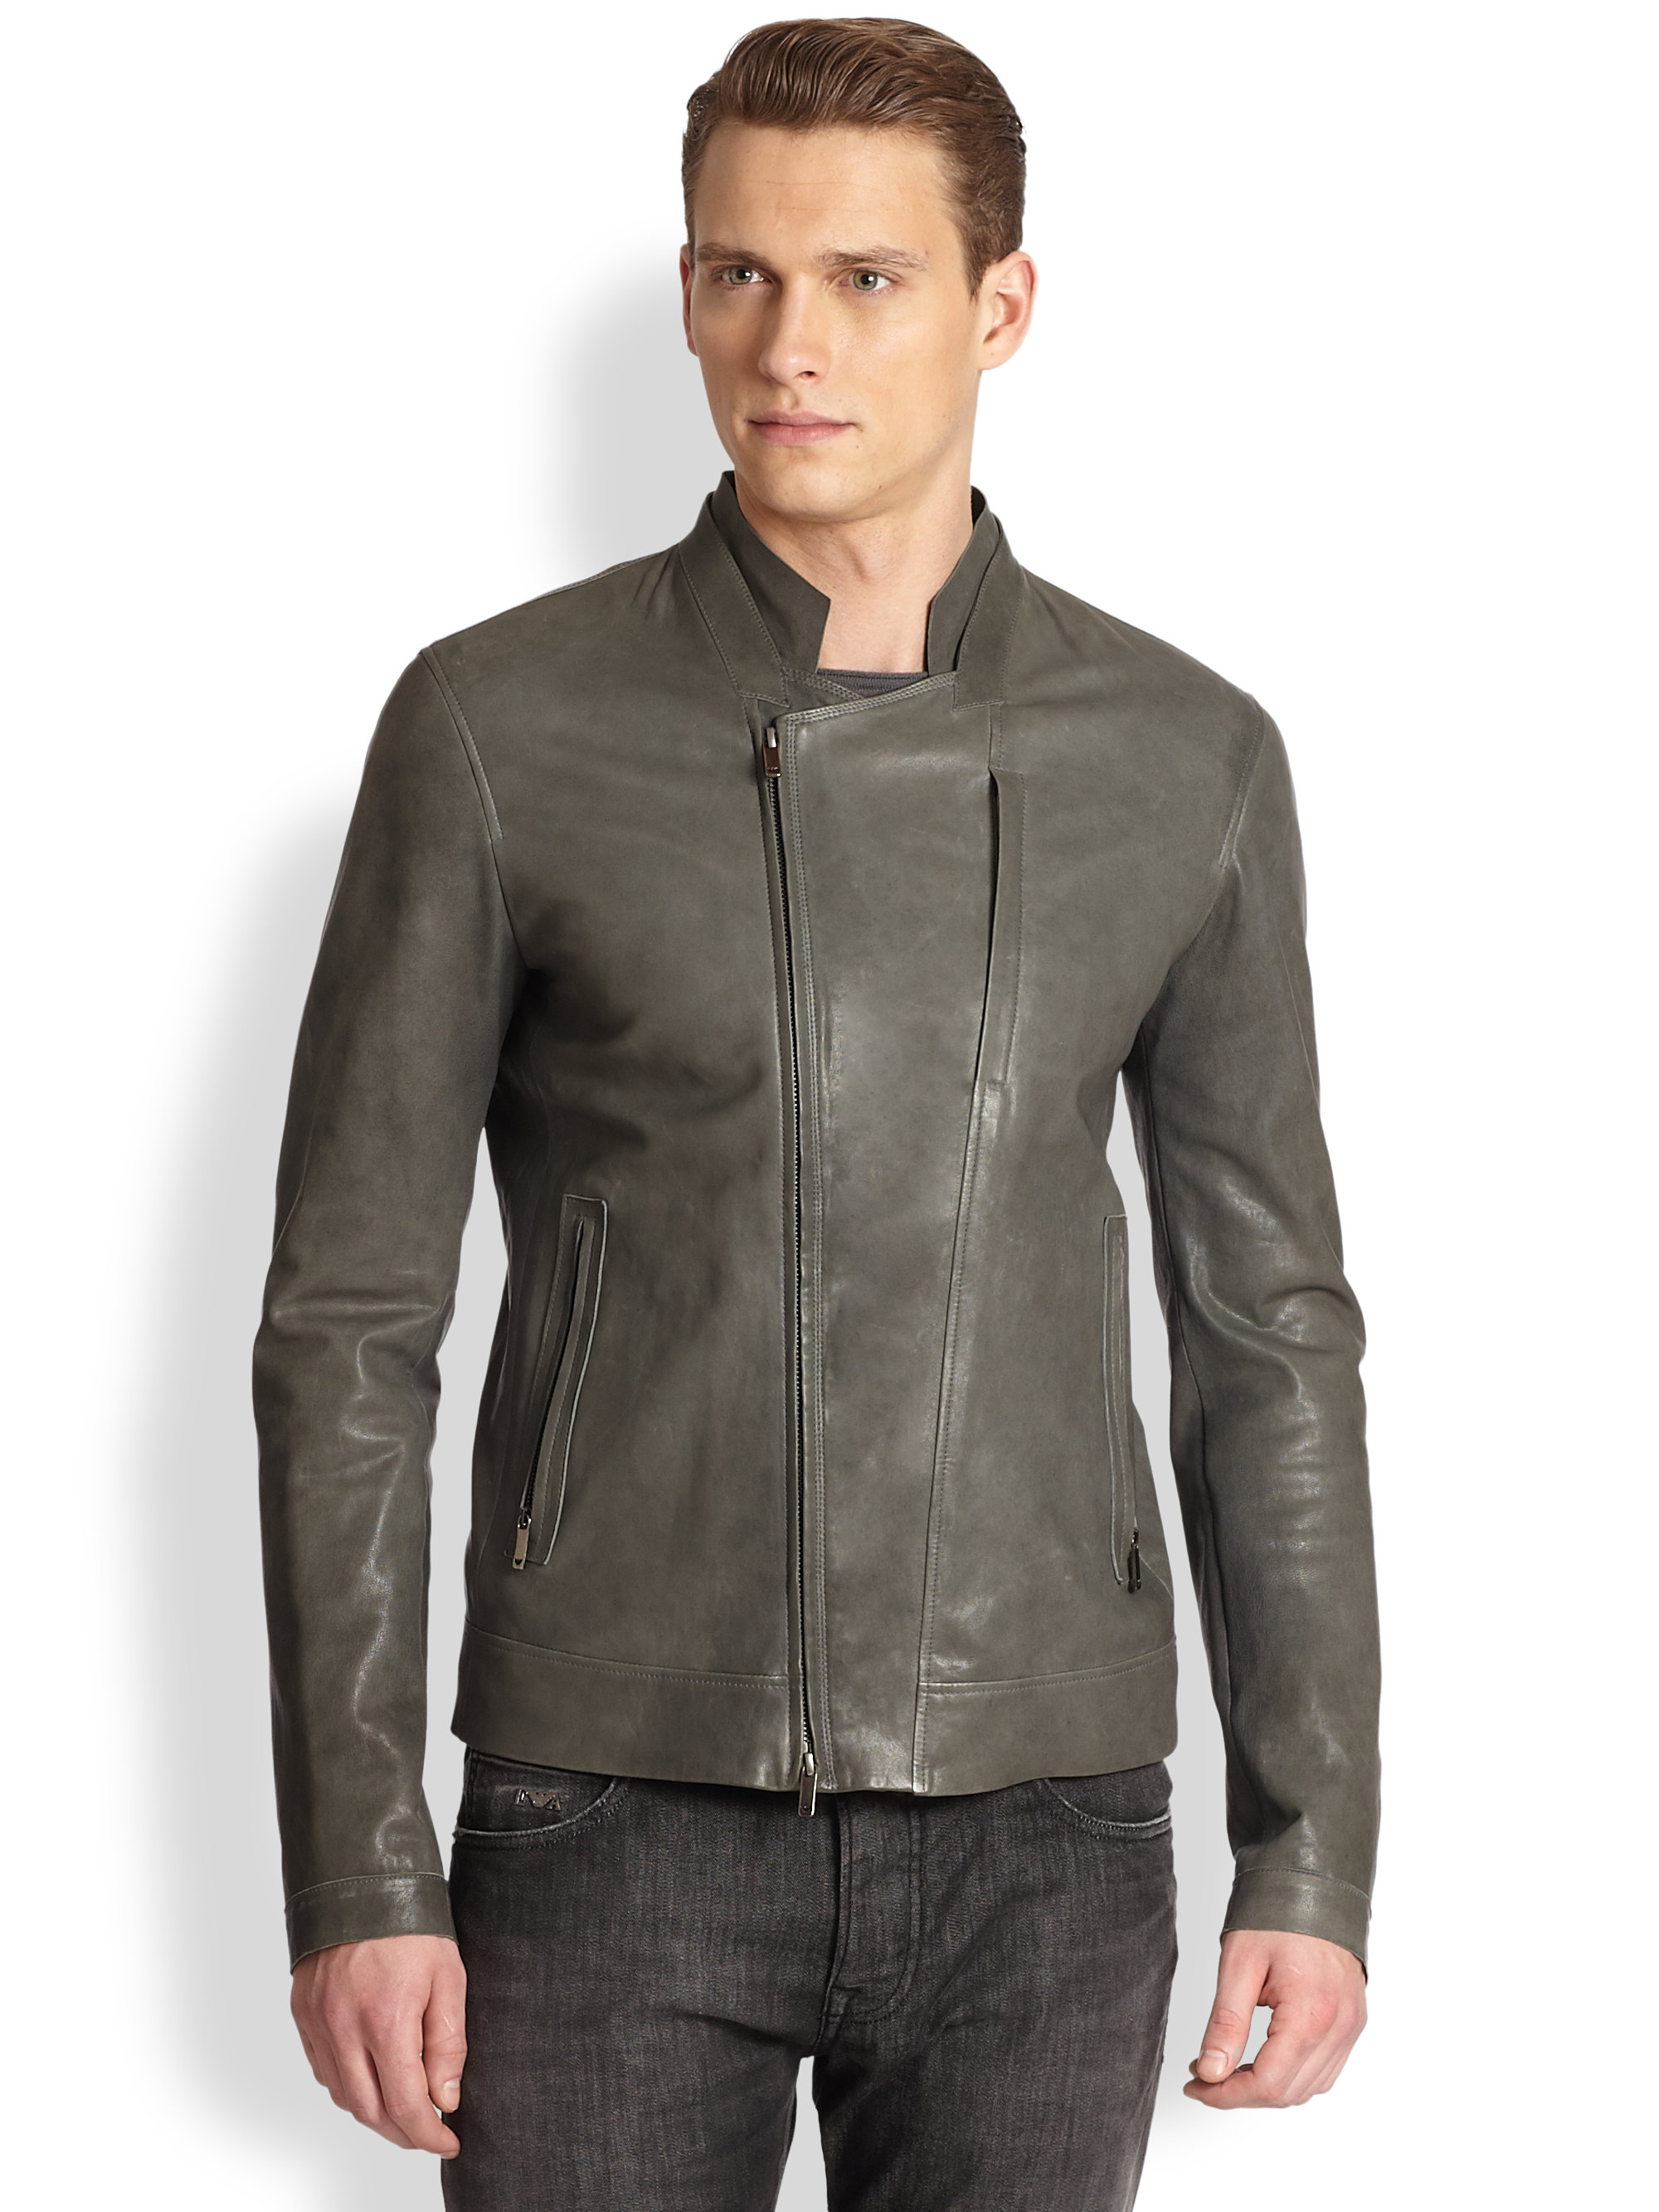 Emporio Armani Asymmetrical Leather Jacket in Gray for Men - Lyst